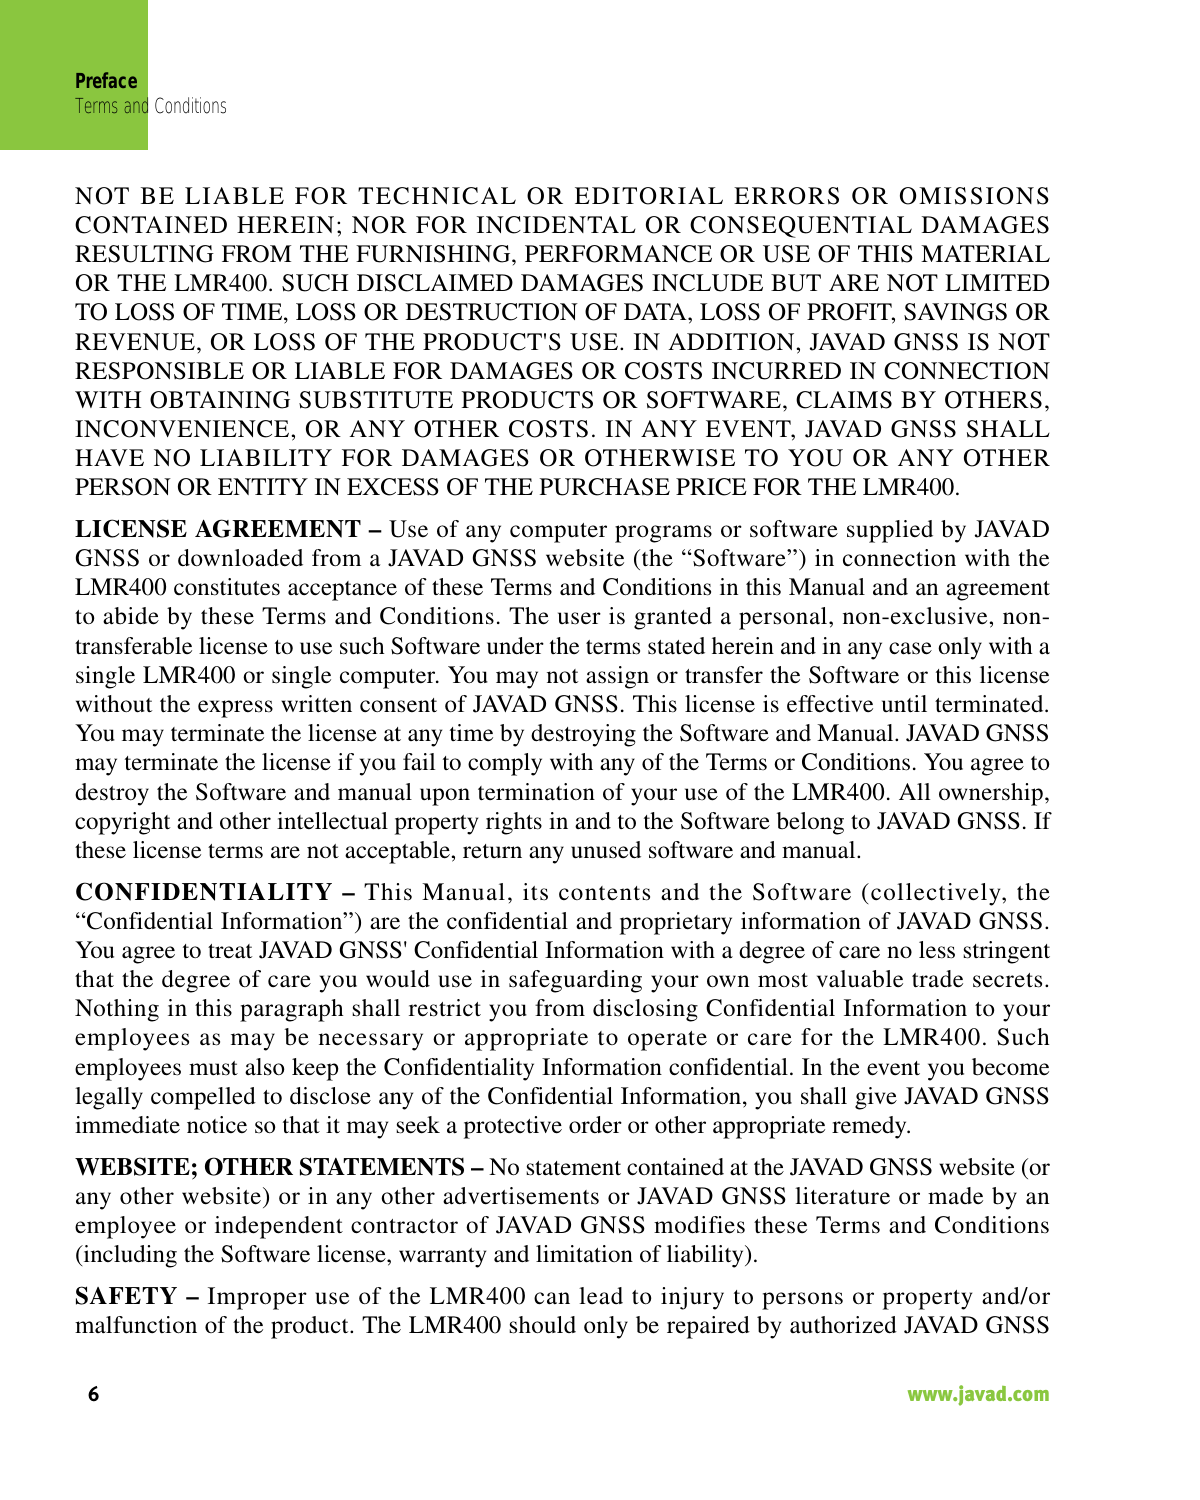 PrefaceTerms and Conditions6                                                                                                                    www.javad.comNOT BE LIABLE FOR TECHNICAL OR EDITORIAL ERRORS OR OMISSIONSCONTAINED HEREIN; NOR FOR INCIDENTAL OR CONSEQUENTIAL DAMAGESRESULTING FROM THE FURNISHING, PERFORMANCE OR USE OF THIS MATERIALOR THE LMR400. SUCH DISCLAIMED DAMAGES INCLUDE BUT ARE NOT LIMITEDTO LOSS OF TIME, LOSS OR DESTRUCTION OF DATA, LOSS OF PROFIT, SAVINGS ORREVENUE, OR LOSS OF THE PRODUCT&apos;S USE. IN ADDITION, JAVAD GNSS IS NOTRESPONSIBLE OR LIABLE FOR DAMAGES OR COSTS INCURRED IN CONNECTIONWITH OBTAINING SUBSTITUTE PRODUCTS OR SOFTWARE, CLAIMS BY OTHERS,INCONVENIENCE, OR ANY OTHER COSTS. IN ANY EVENT, JAVAD GNSS SHALLHAVE NO LIABILITY FOR DAMAGES OR OTHERWISE TO YOU OR ANY OTHERPERSON OR ENTITY IN EXCESS OF THE PURCHASE PRICE FOR THE LMR400. LICENSE AGREEMENT – Use of any computer programs or software supplied by JAVADGNSS or downloaded from a JAVAD GNSS website (the “Software”) in connection with theLMR400 constitutes acceptance of these Terms and Conditions in this Manual and an agreementto abide by these Terms and Conditions. The user is granted a personal, non-exclusive, non-transferable license to use such Software under the terms stated herein and in any case only with asingle LMR400 or single computer. You may not assign or transfer the Software or this licensewithout the express written consent of JAVAD GNSS. This license is effective until terminated.You may terminate the license at any time by destroying the Software and Manual. JAVAD GNSSmay terminate the license if you fail to comply with any of the Terms or Conditions. You agree todestroy the Software and manual upon termination of your use of the LMR400. All ownership,copyright and other intellectual property rights in and to the Software belong to JAVAD GNSS. Ifthese license terms are not acceptable, return any unused software and manual.CONFIDENTIALITY – This Manual, its contents and the Software (collectively, the“Confidential Information”) are the confidential and proprietary information of JAVAD GNSS.You agree to treat JAVAD GNSS&apos; Confidential Information with a degree of care no less stringentthat the degree of care you would use in safeguarding your own most valuable trade secrets.Nothing in this paragraph shall restrict you from disclosing Confidential Information to youremployees as may be necessary or appropriate to operate or care for the LMR400. Suchemployees must also keep the Confidentiality Information confidential. In the event you becomelegally compelled to disclose any of the Confidential Information, you shall give JAVAD GNSSimmediate notice so that it may seek a protective order or other appropriate remedy.WEBSITE; OTHER STATEMENTS – No statement contained at the JAVAD GNSS website (orany other website) or in any other advertisements or JAVAD GNSS literature or made by anemployee or independent contractor of JAVAD GNSS modifies these Terms and Conditions(including the Software license, warranty and limitation of liability). SAFETY – Improper use of the LMR400 can lead to injury to persons or property and/ormalfunction of the product. The LMR400 should only be repaired by authorized JAVAD GNSS